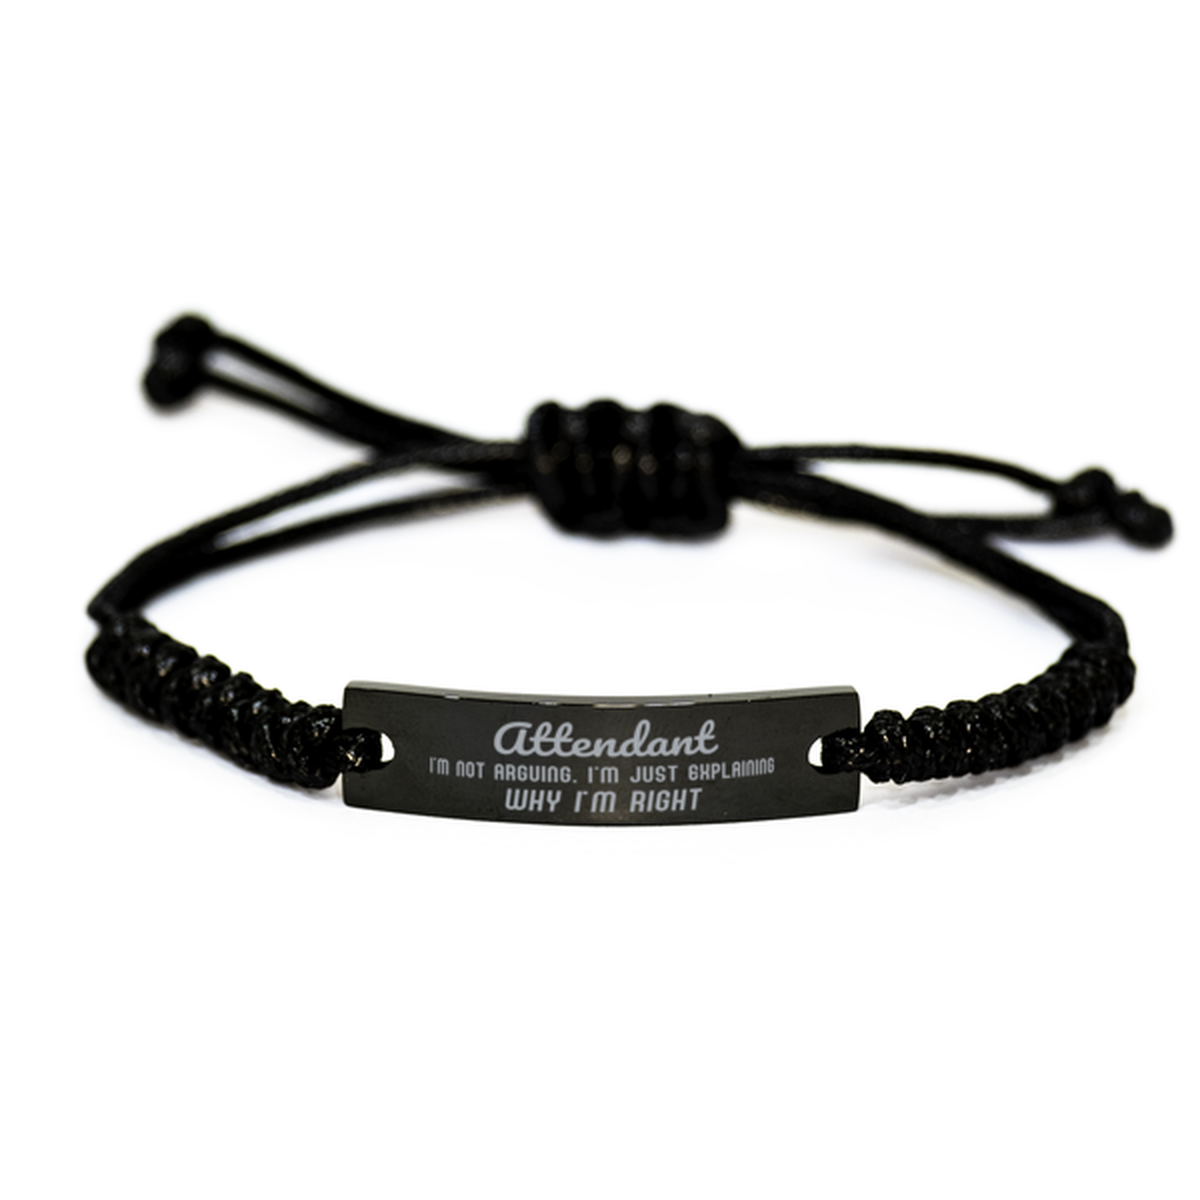 Attendant I'm not Arguing. I'm Just Explaining Why I'm RIGHT Black Rope Bracelet, Funny Saying Quote Attendant Gifts For Attendant Graduation Birthday Christmas Gifts for Men Women Coworker